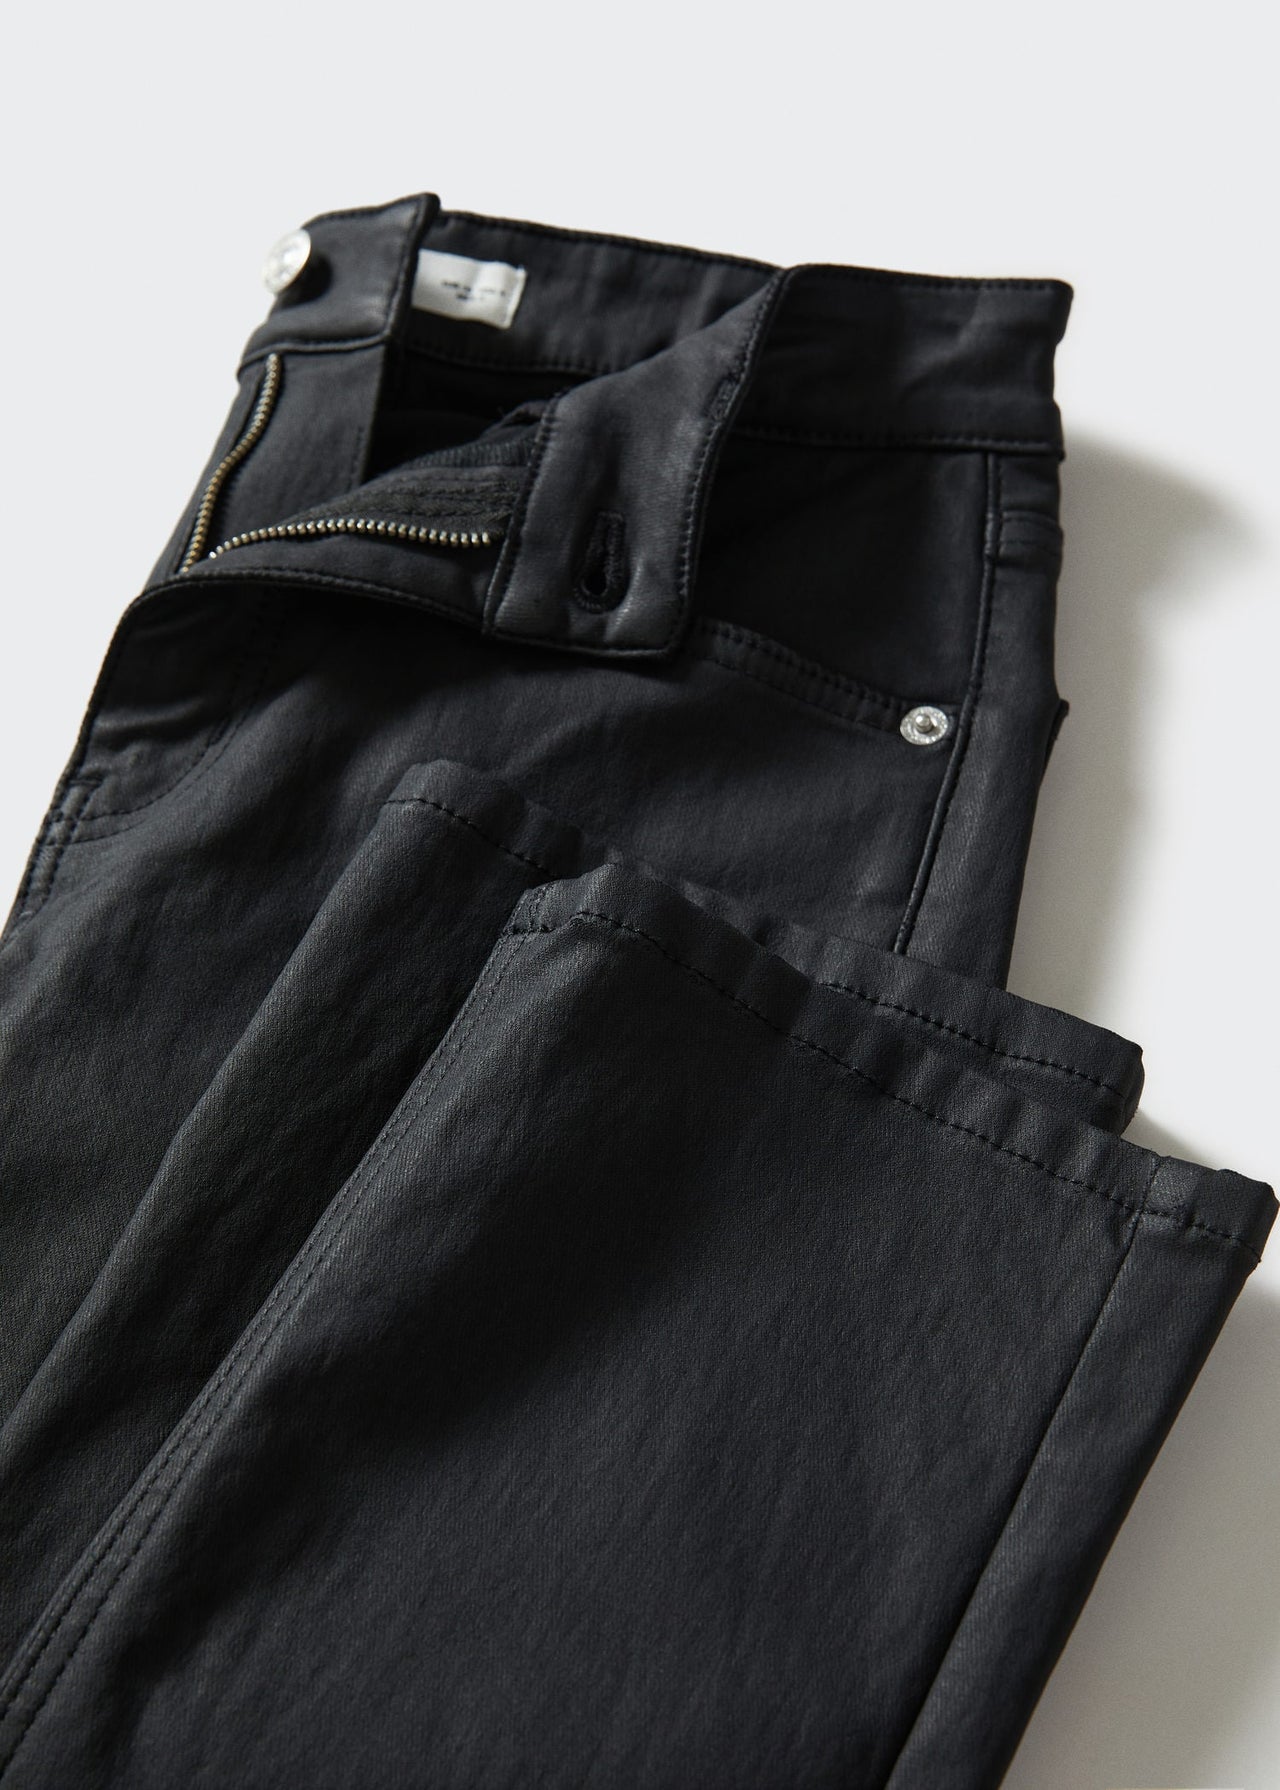 Straight waxed crop jeans